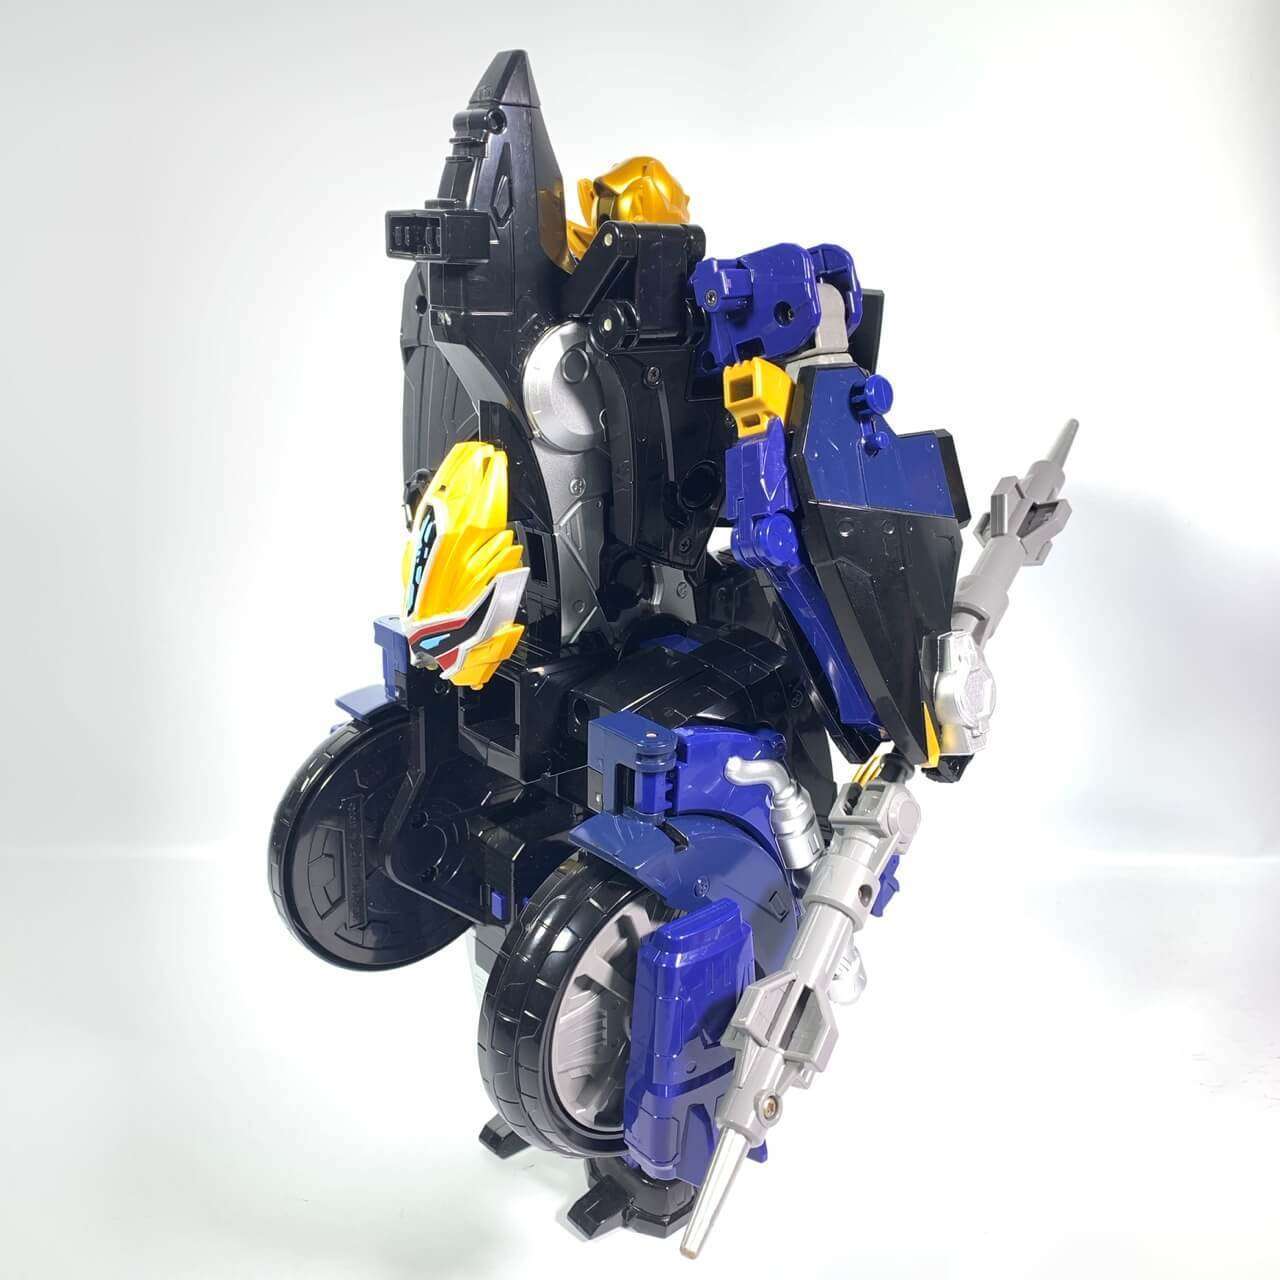 [LOOSE] Tokumei Sentai Go-Busters: Buster Machine LT-06 DX Tategamilioh & CB-01 DX Go-Buster Ace Special Set | CSTOYS INTERNATIONAL